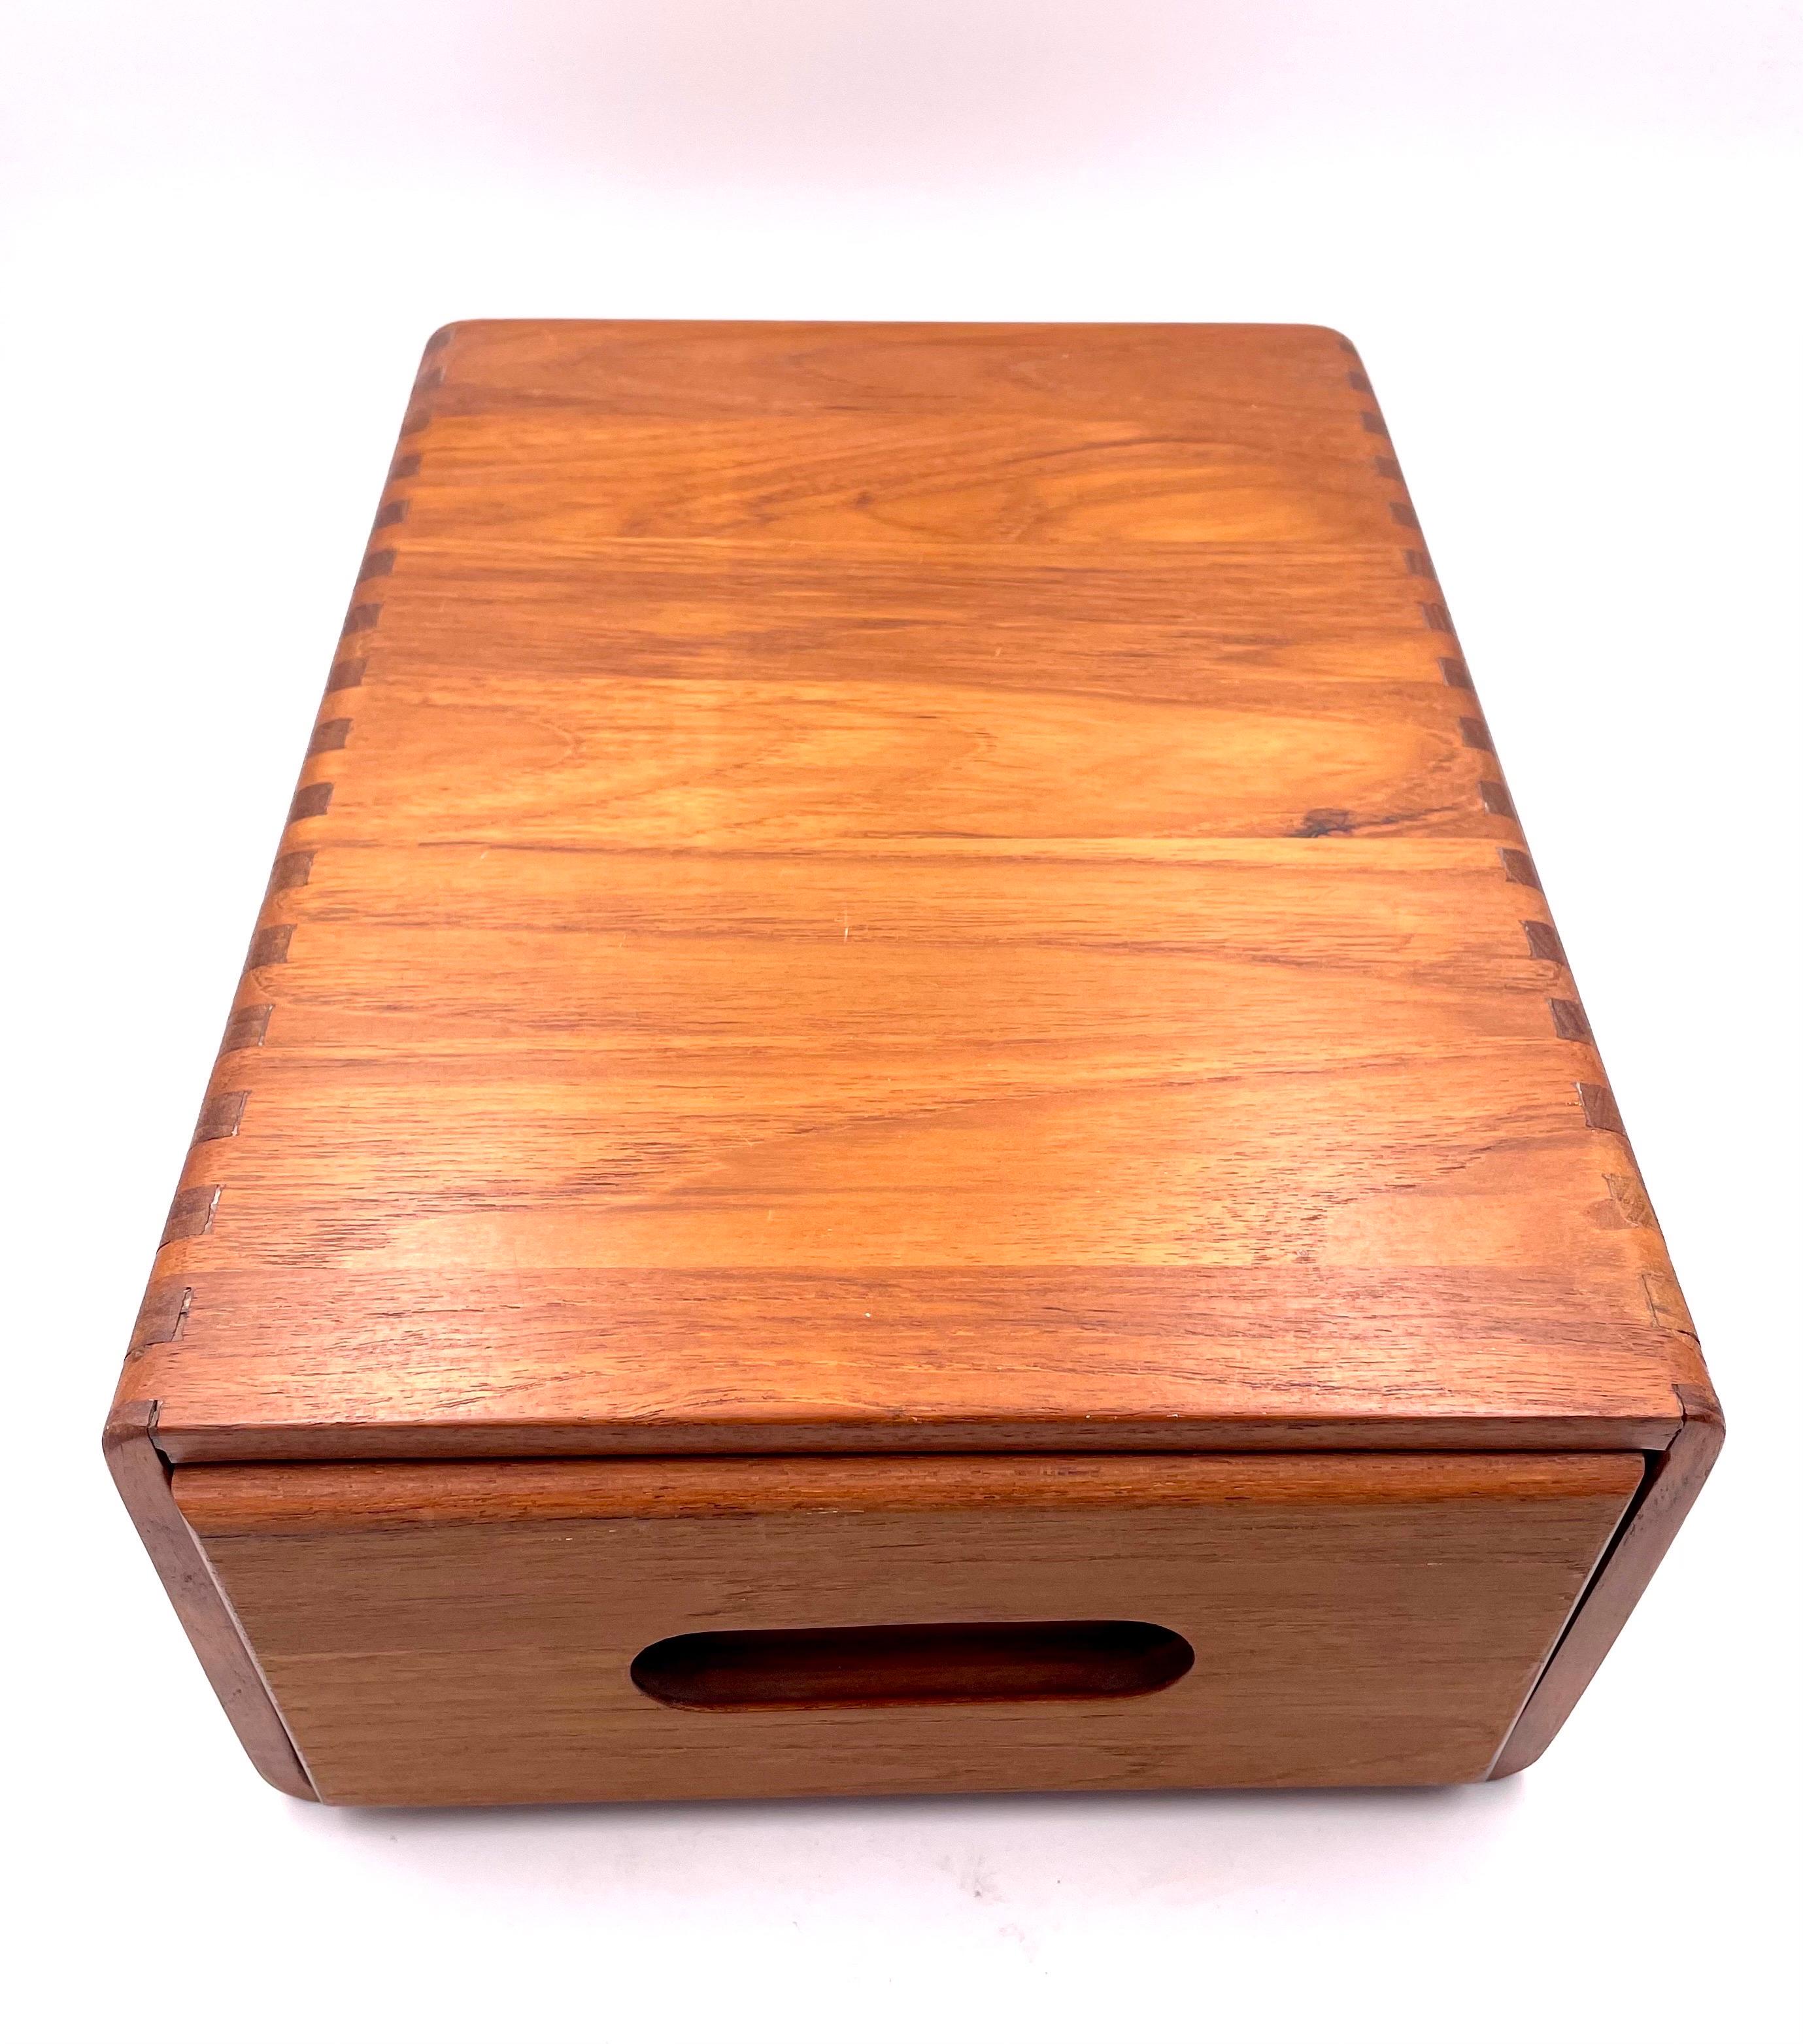 Beautiful handmade solid teak box with drawer, circa 1980s simple and elegant well made dovetail great quality.